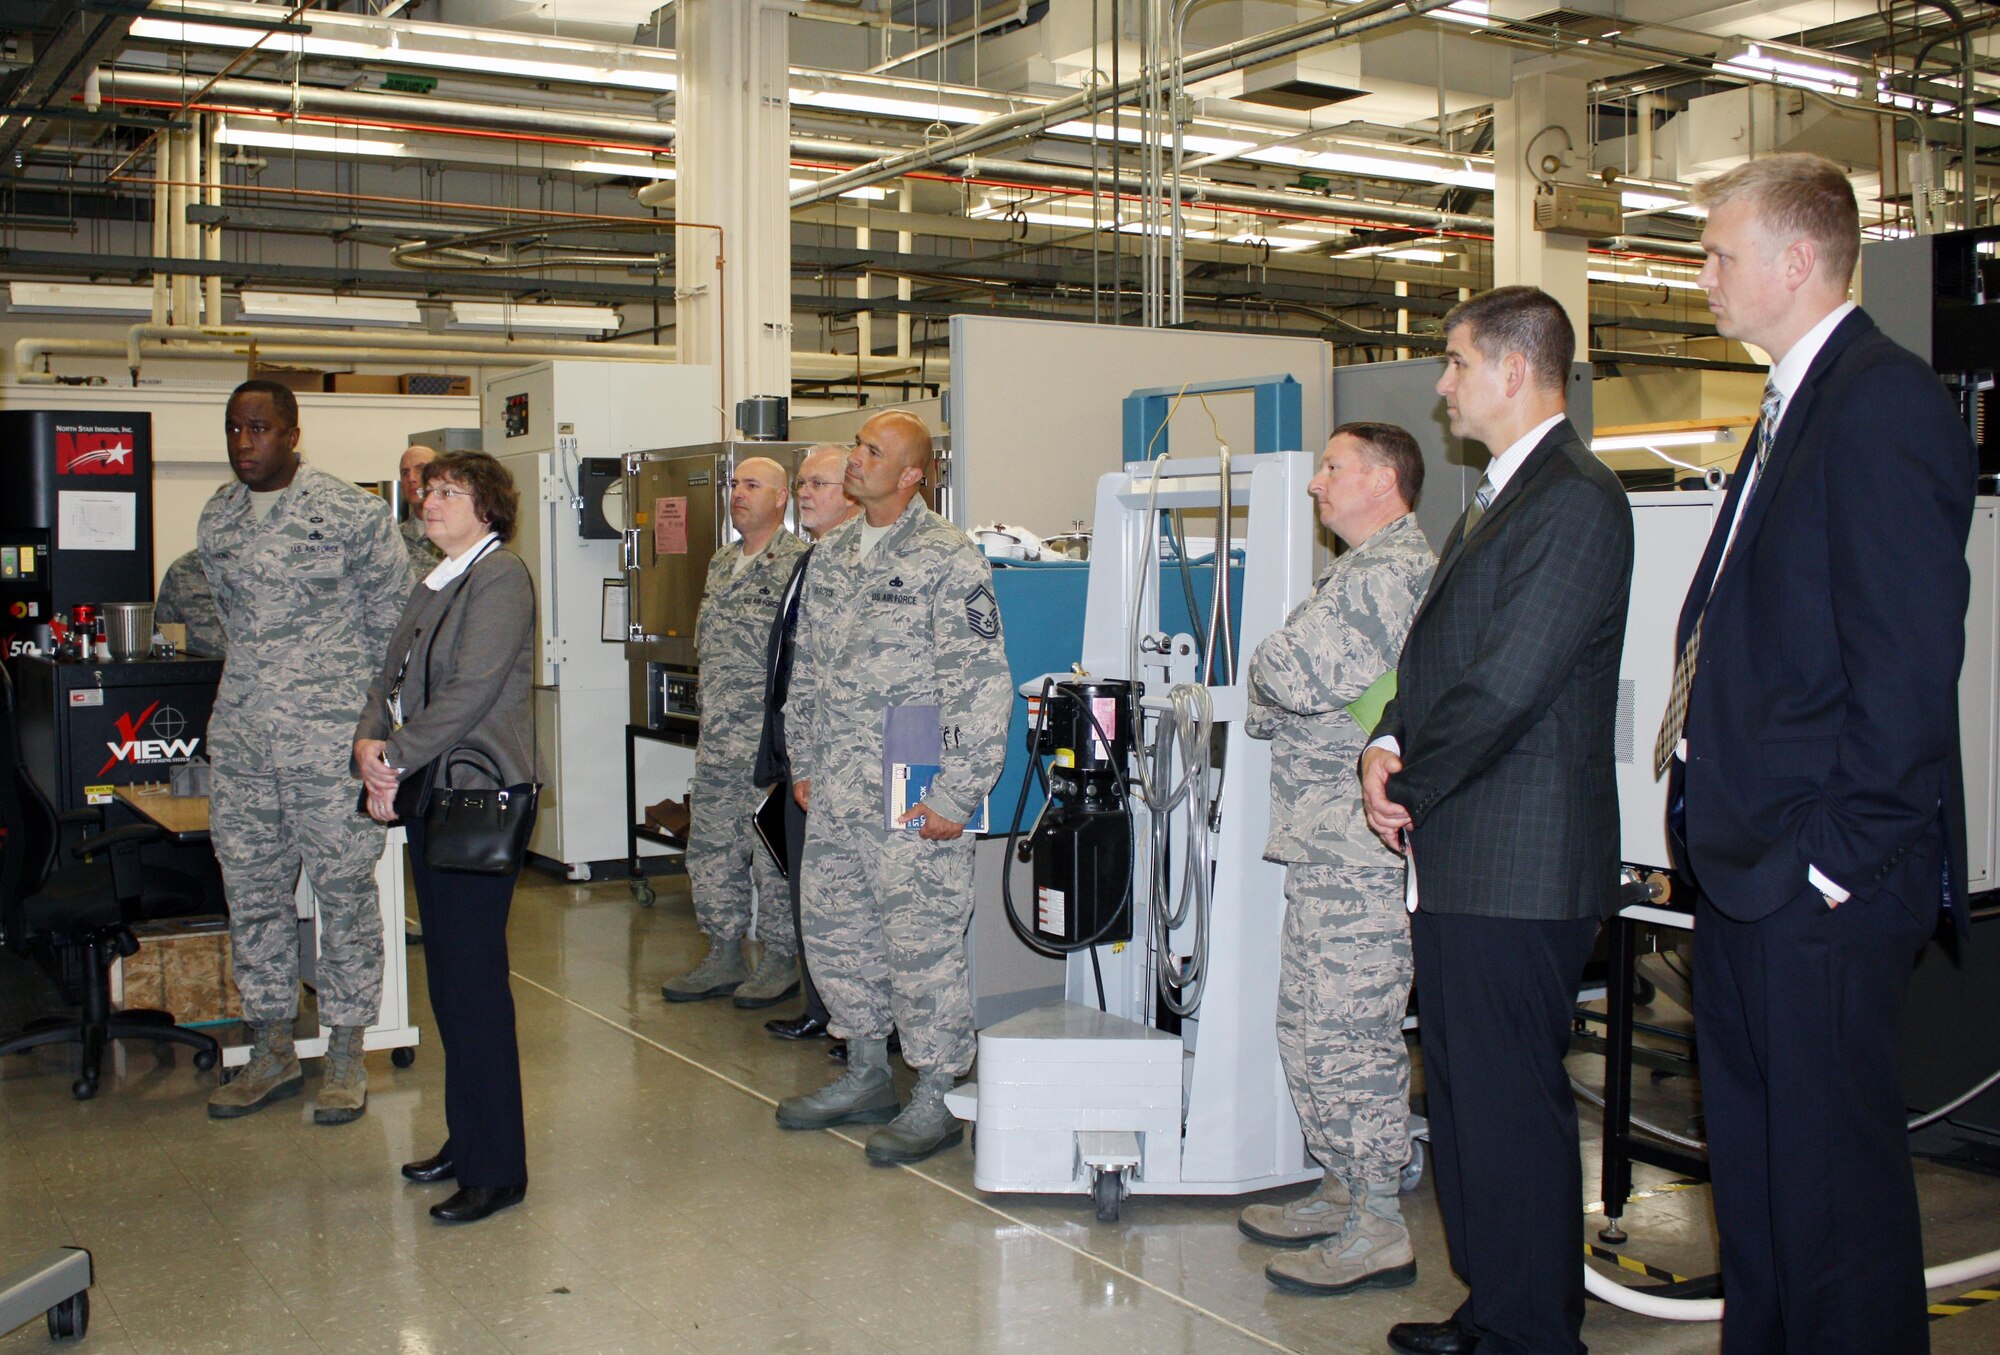 WRIGHT-PATTERSON AIR FORCE BASE, Ohio – Brig. Gen. Stacey T. Hawkins, Director, Logistcs, Engineering and Force Protection, Air Mobility Command (left) and Dr. Donna C. Senft, Chief Scientist, Air Mobility Command, along with core members of the aircraft maintenance team visited the Materials and Manufacturing Directorate, Air Force Research Laboratory, to gain in-depth knowledge of additive manufacturing capabilities and technologies, Aug. 26. The visit included a directorate overview, discussions on additive manufacturing applications and visits to multiple research laboratories, highlighting 3-D printing capabilities for metals, polymer-based materials and functional material applications. AMC is exploring the possibilities of using additive manufacturing as a cost-saving option for replacement parts for aircraft during the life-cycle maintenance process. (Air Force photo by Marisa Novobilski/released)